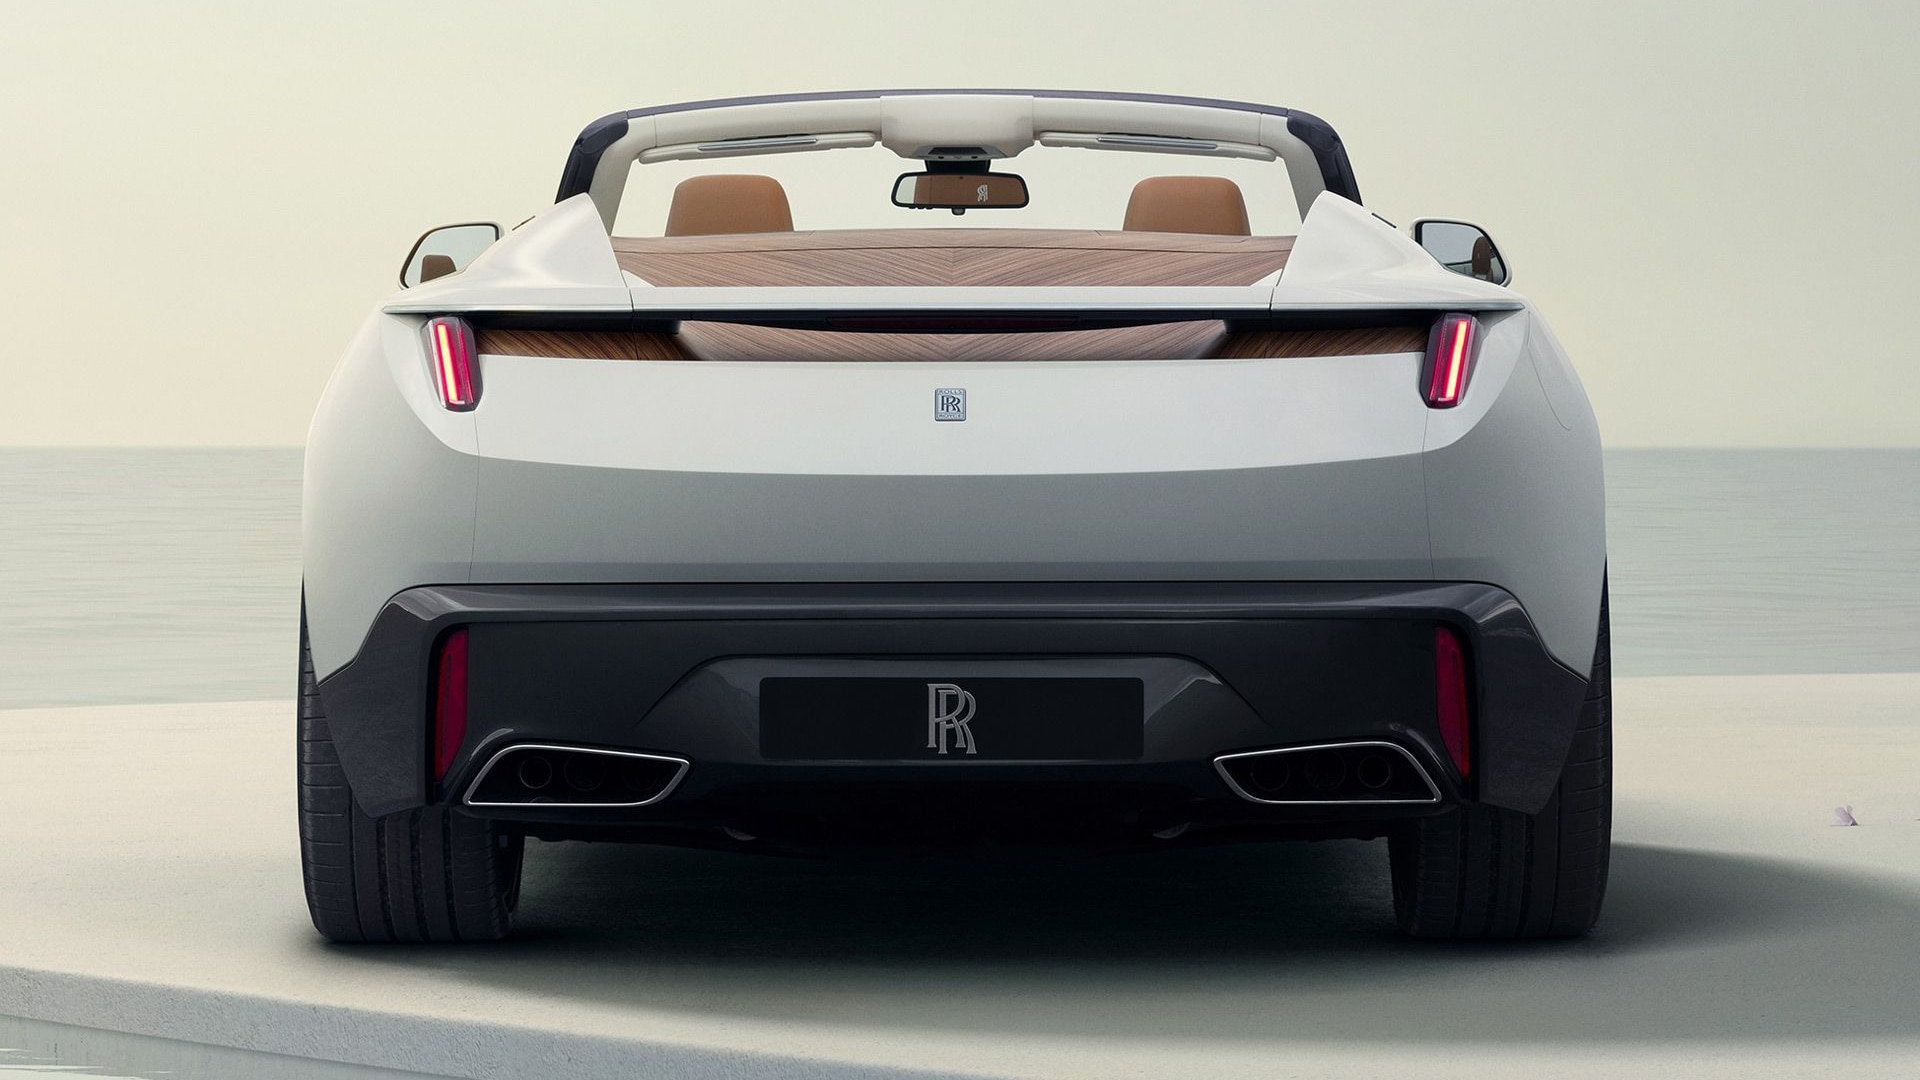 The Latest Rolls-Royce Droptail Roadster is the Arcadia